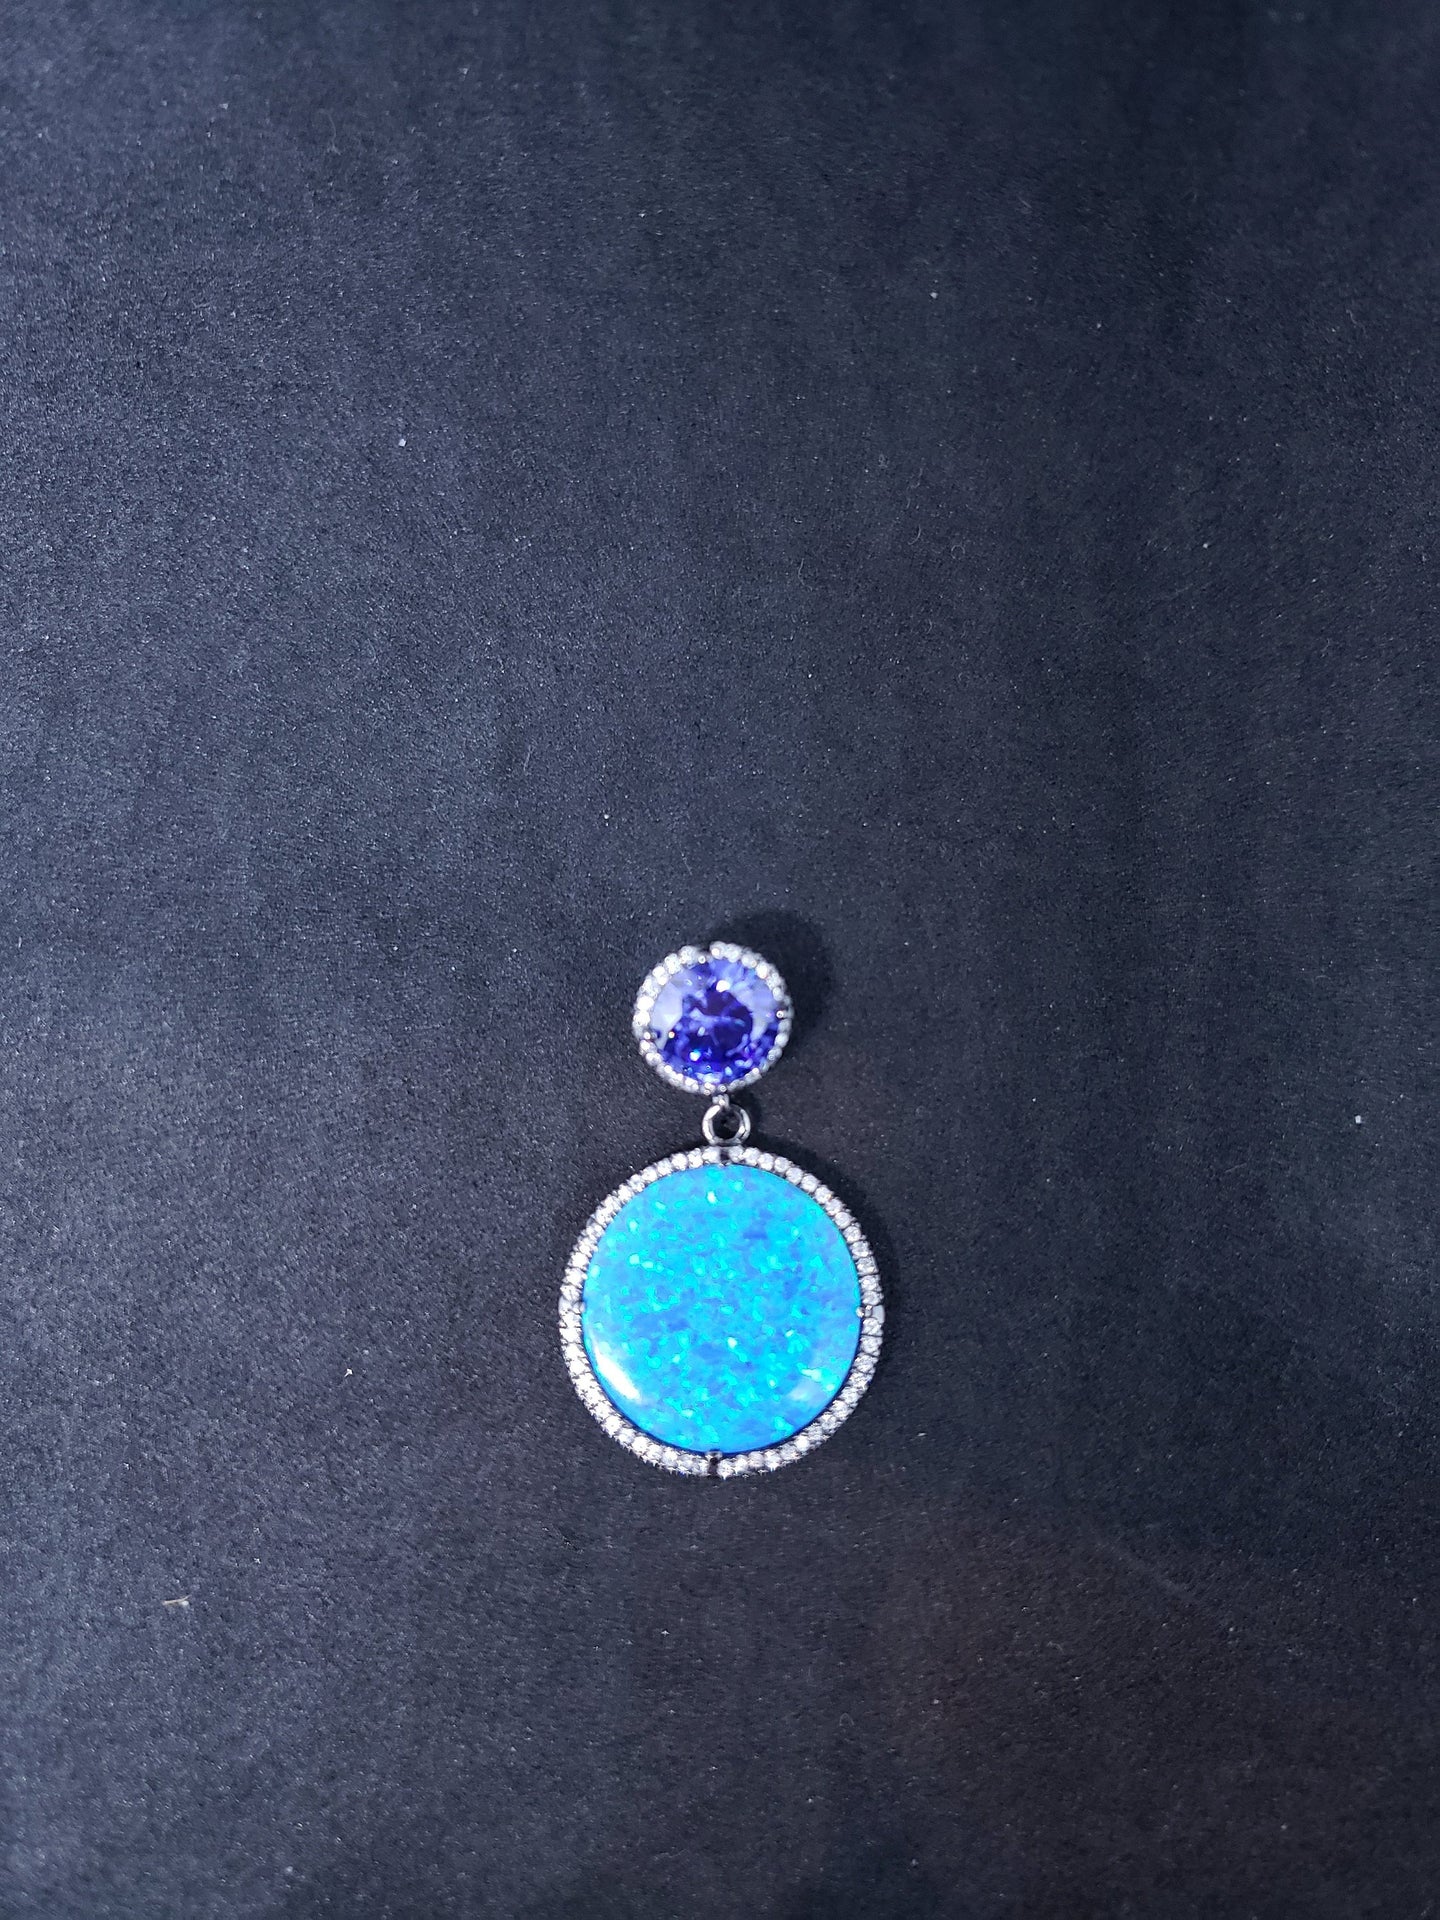 Blue fire opal amethyst with CZ sterling silver round pendant